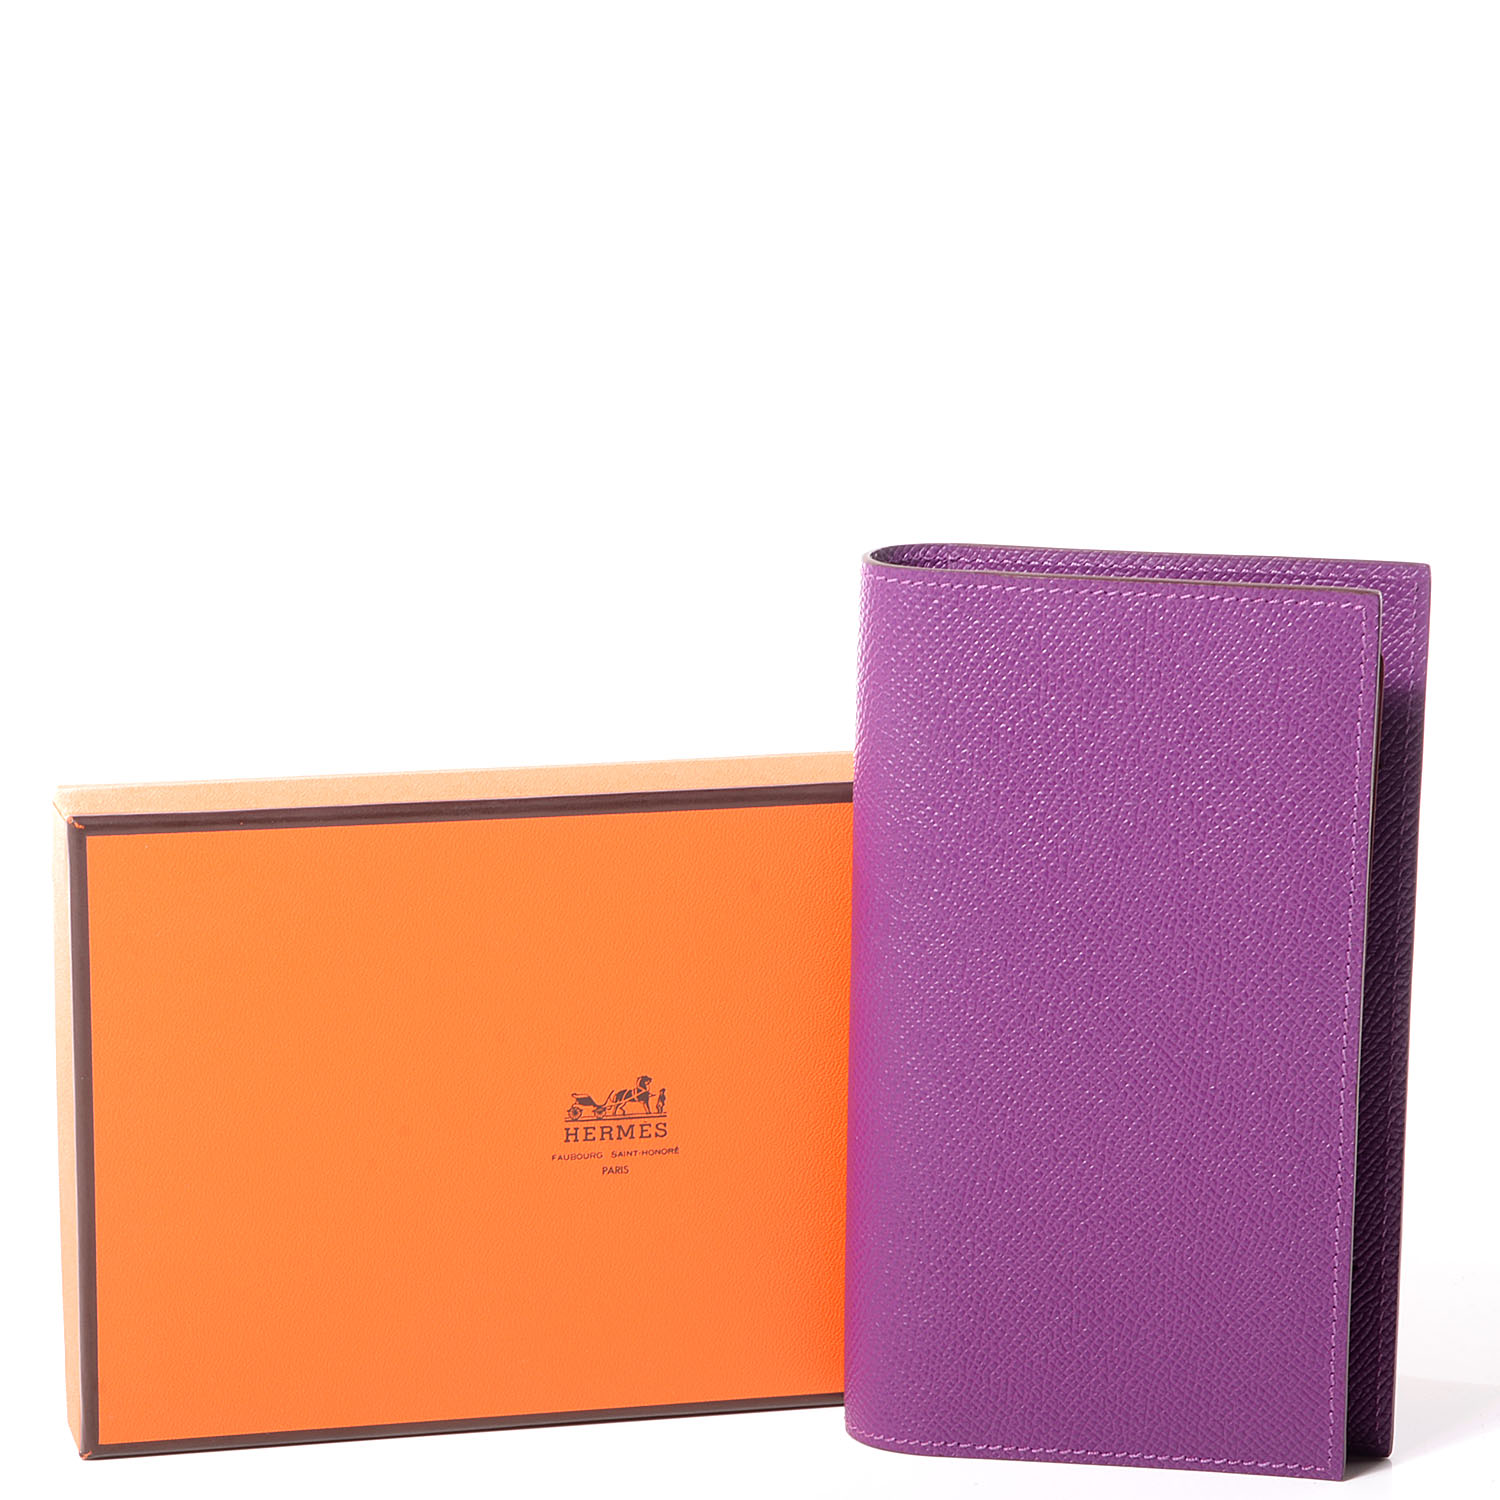 HERMES Epsom Vision II Agenda Cover with Refill Cyclamen 66943 ...